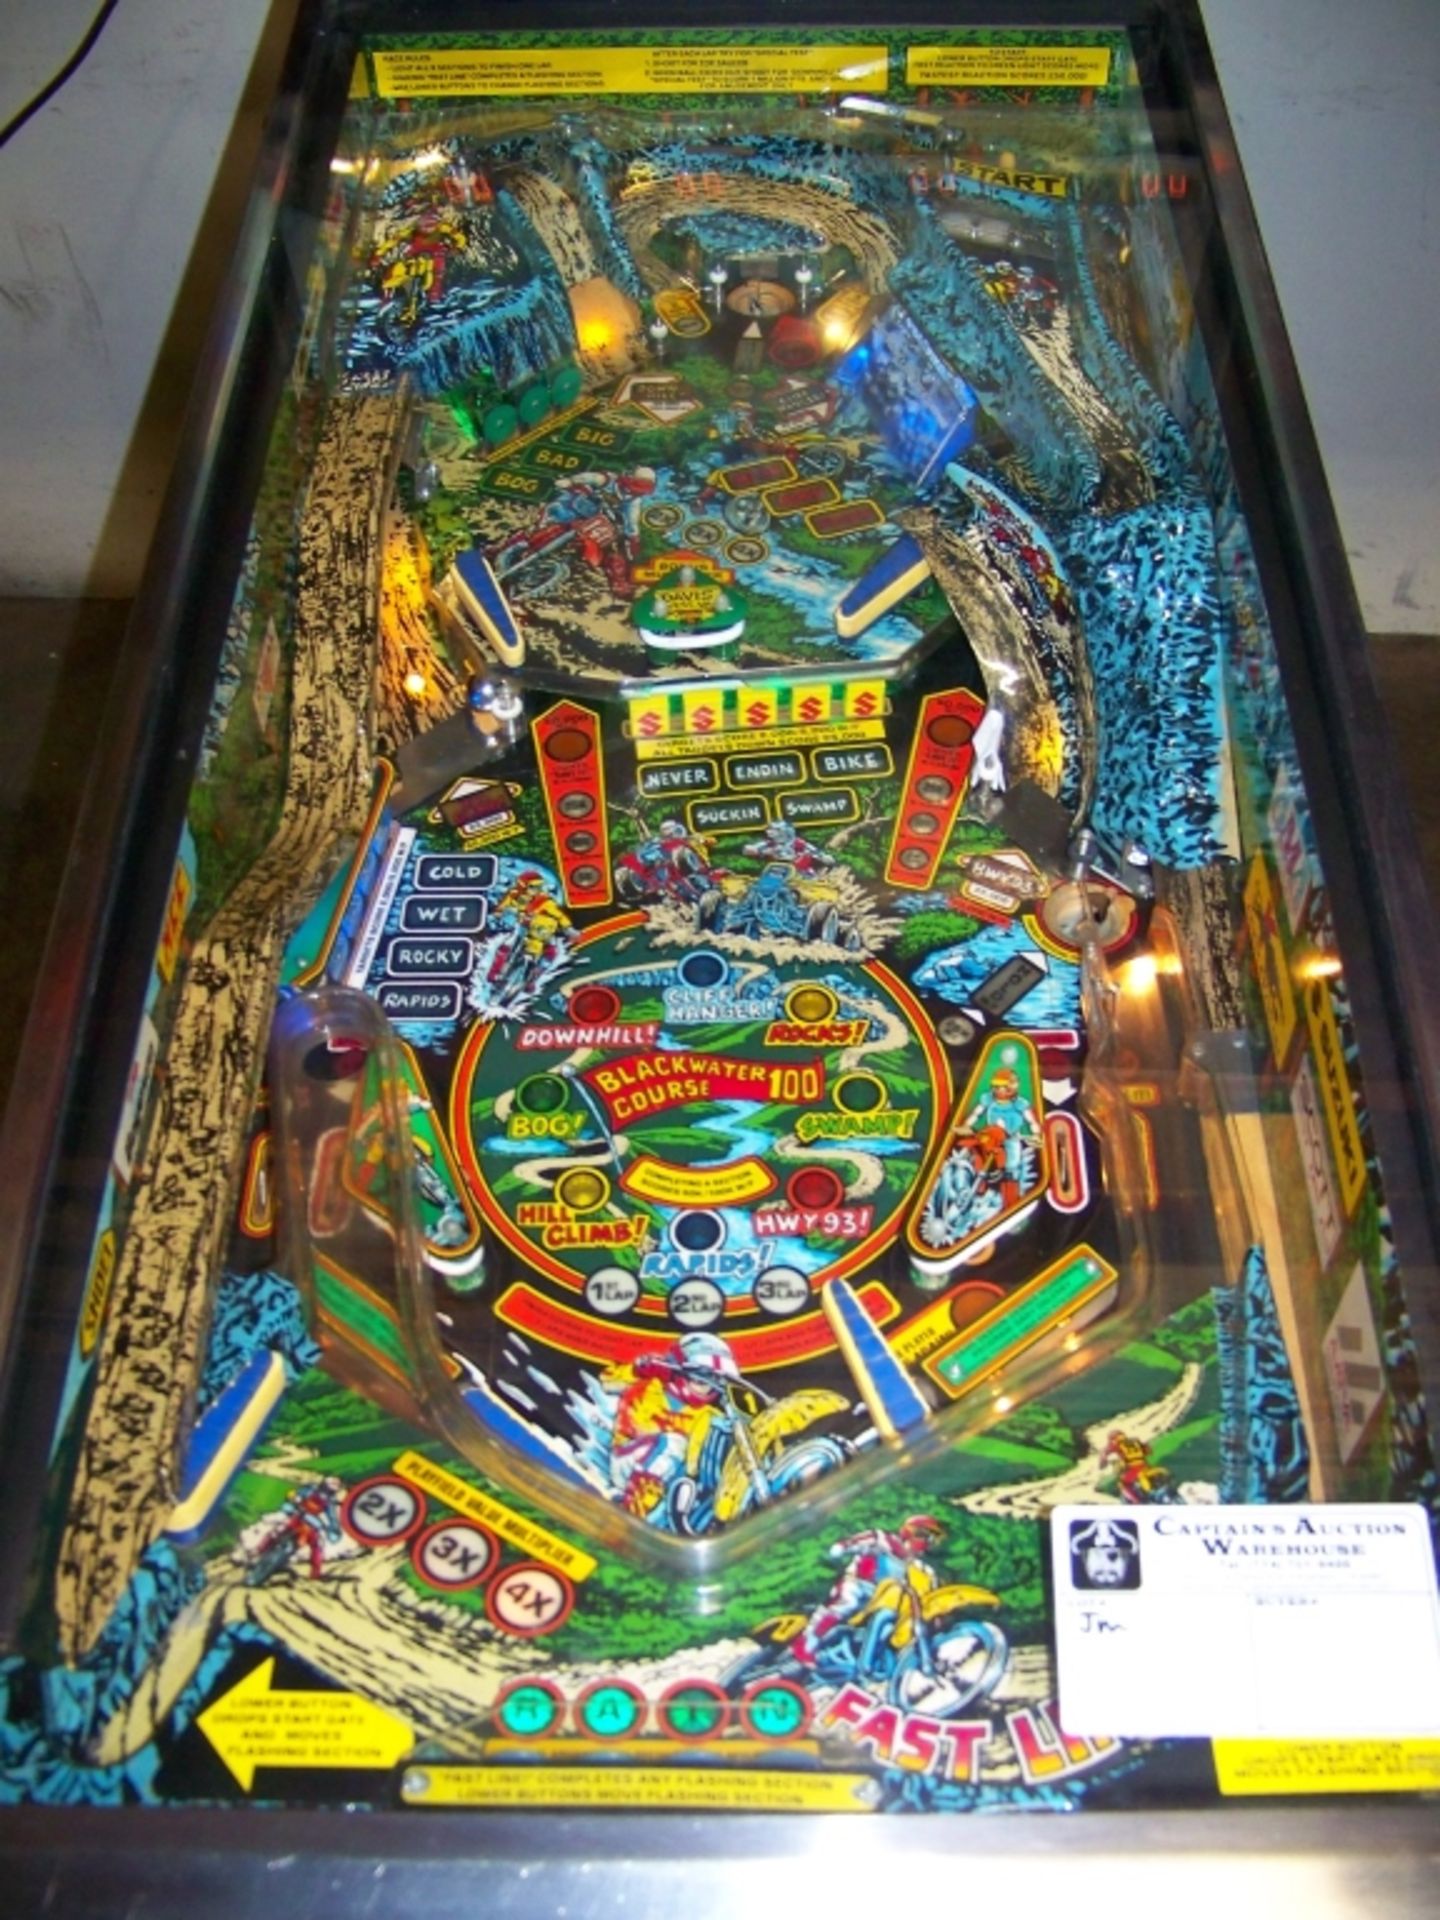 BLACKWATER 100 PINBALL MACHINE BALLY 1988 Item is in used condition. Evidence of wear and commercial - Image 5 of 10